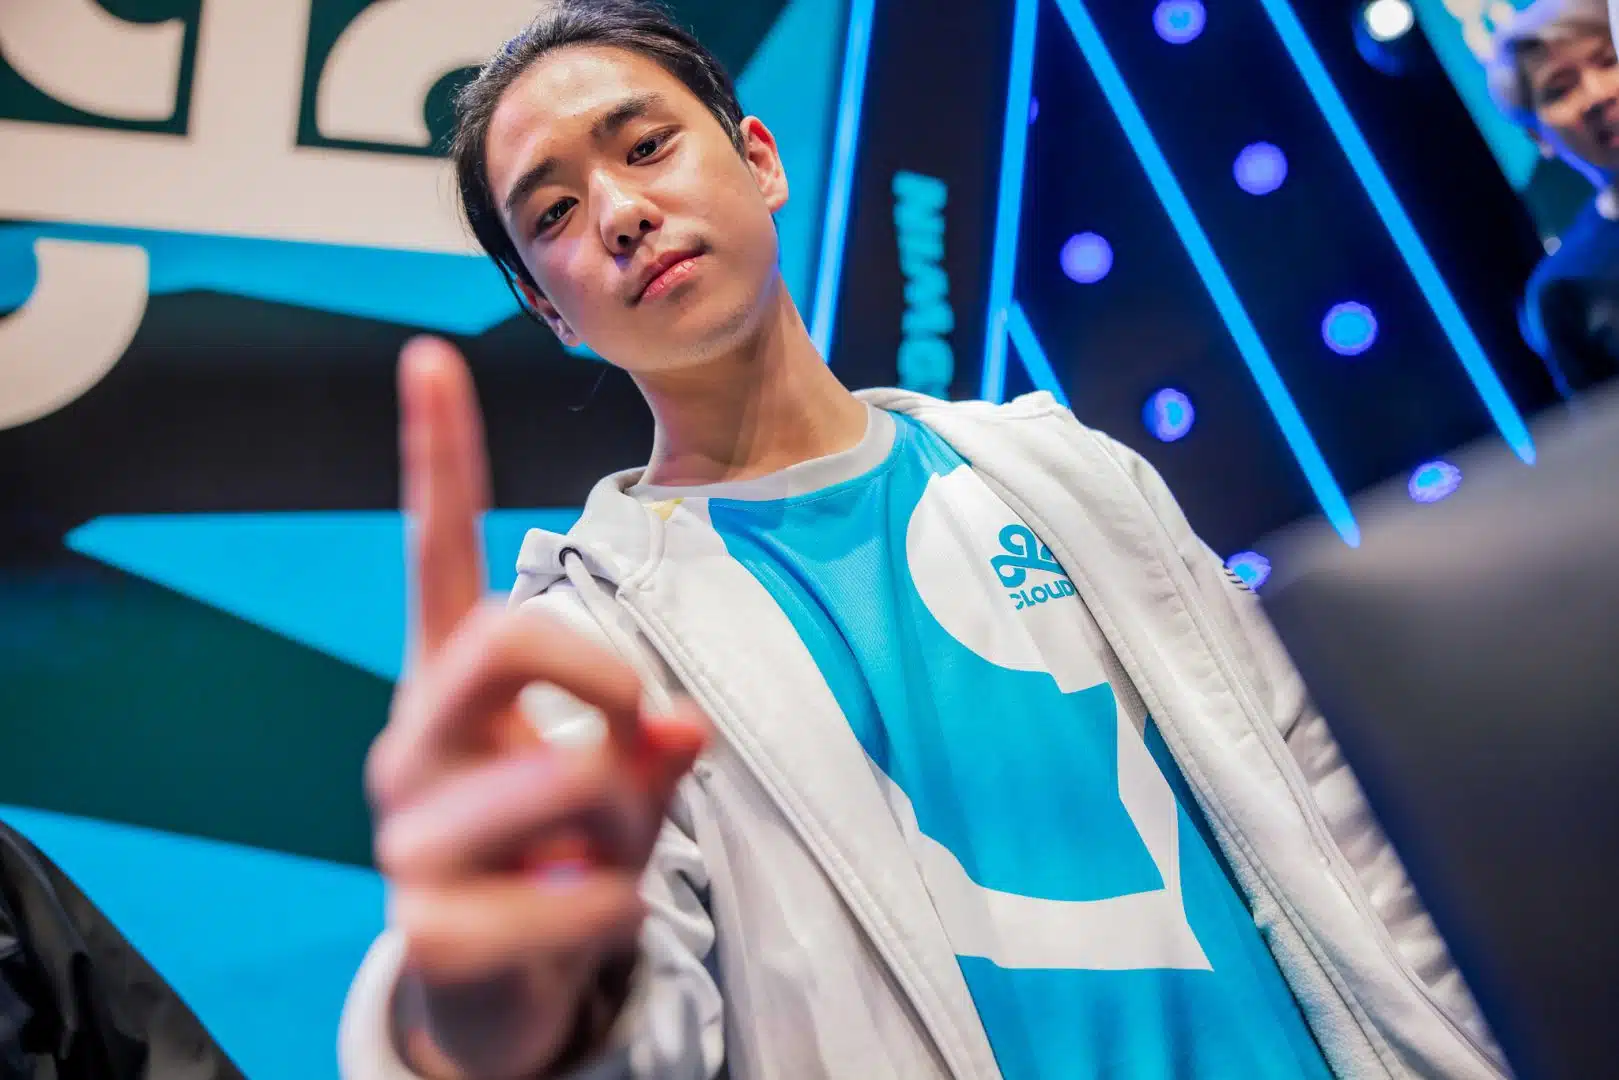 Cloud9 Secures Its Future: Star Players Stay Through 2026 LCS Seasons